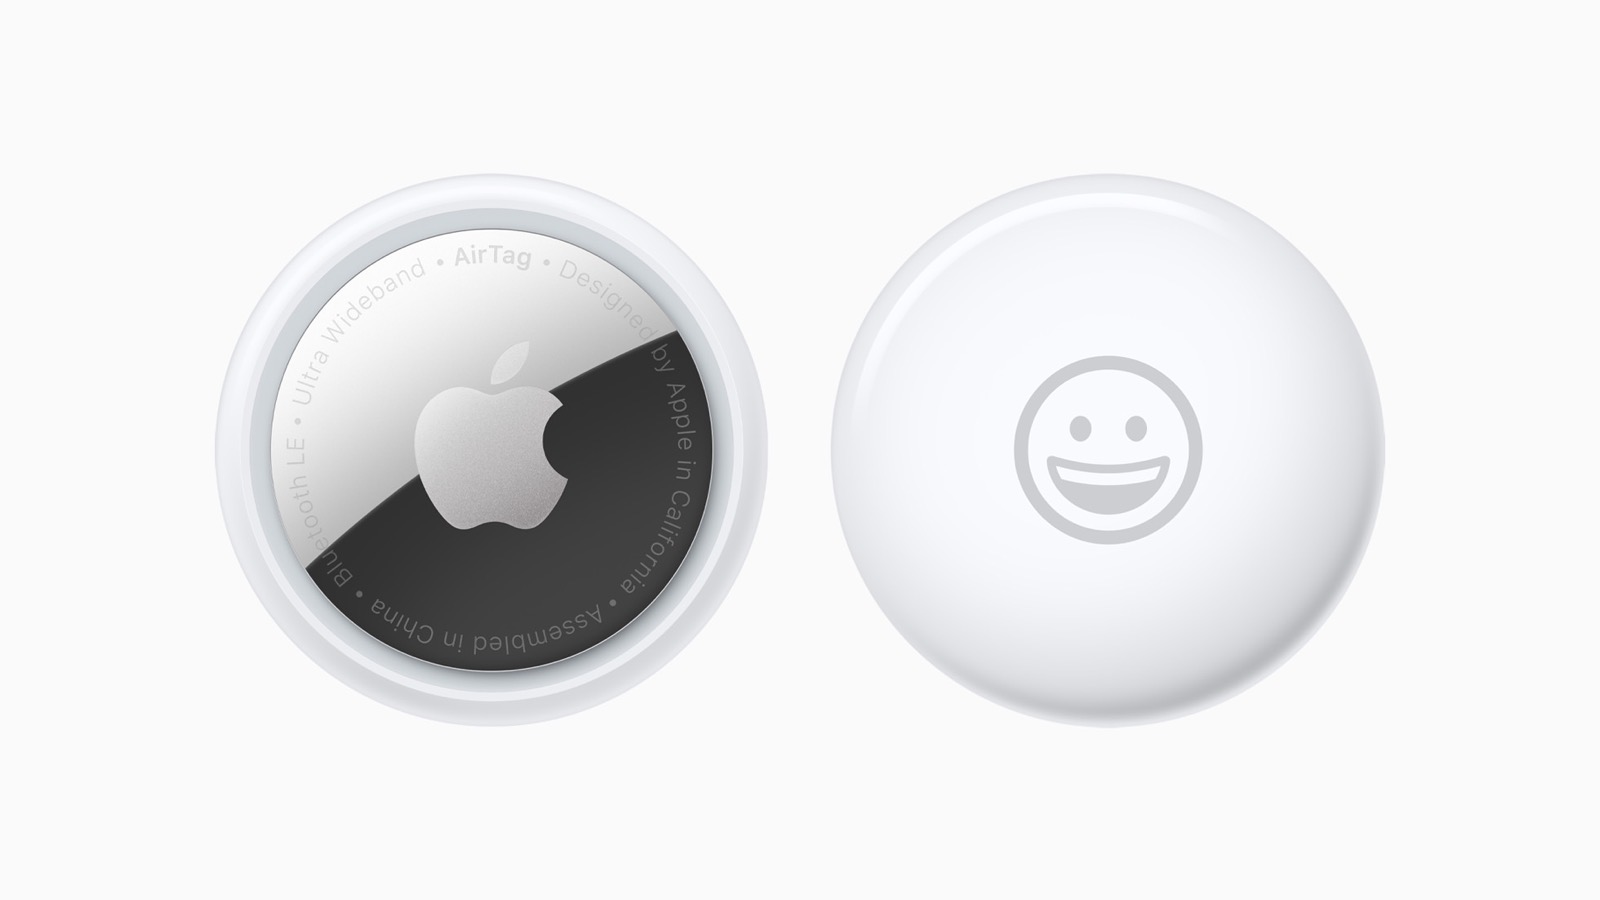 Apple_airtag-front-and-back-emoji-2up_042021.jpg